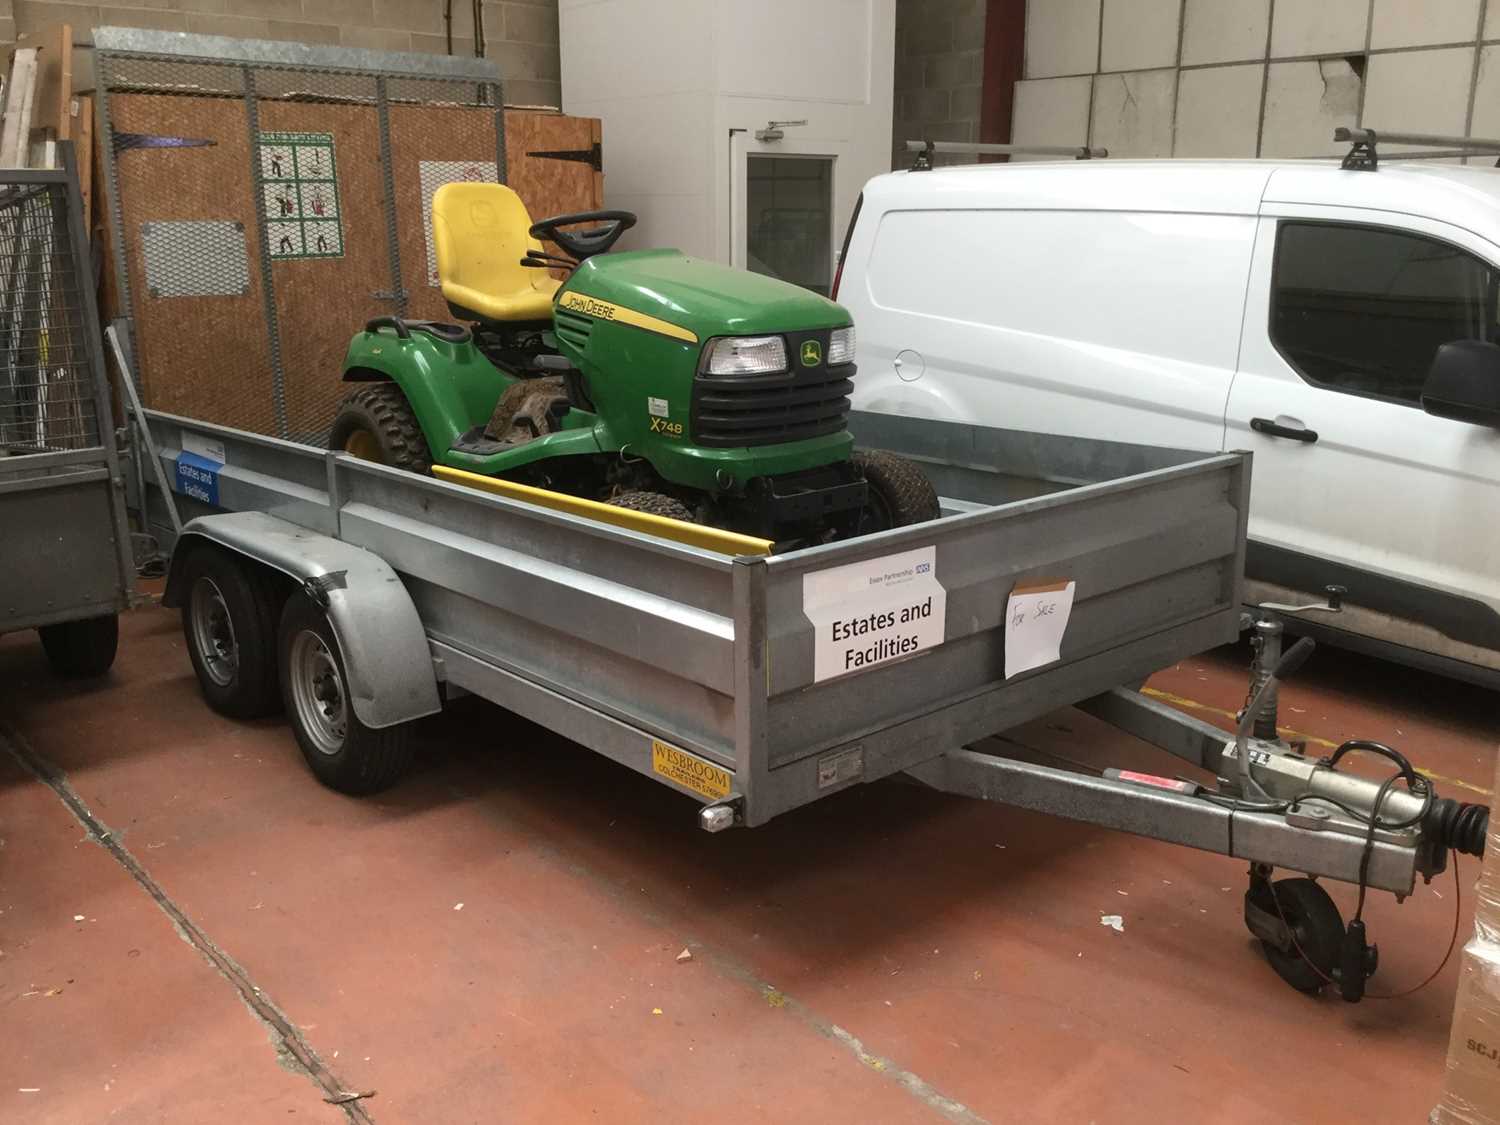 Lot 1 - Wesbroom Trailers twin axel plant trailer with hinged loading ramp, Serial No. 1682113, 3000 KG gross weight